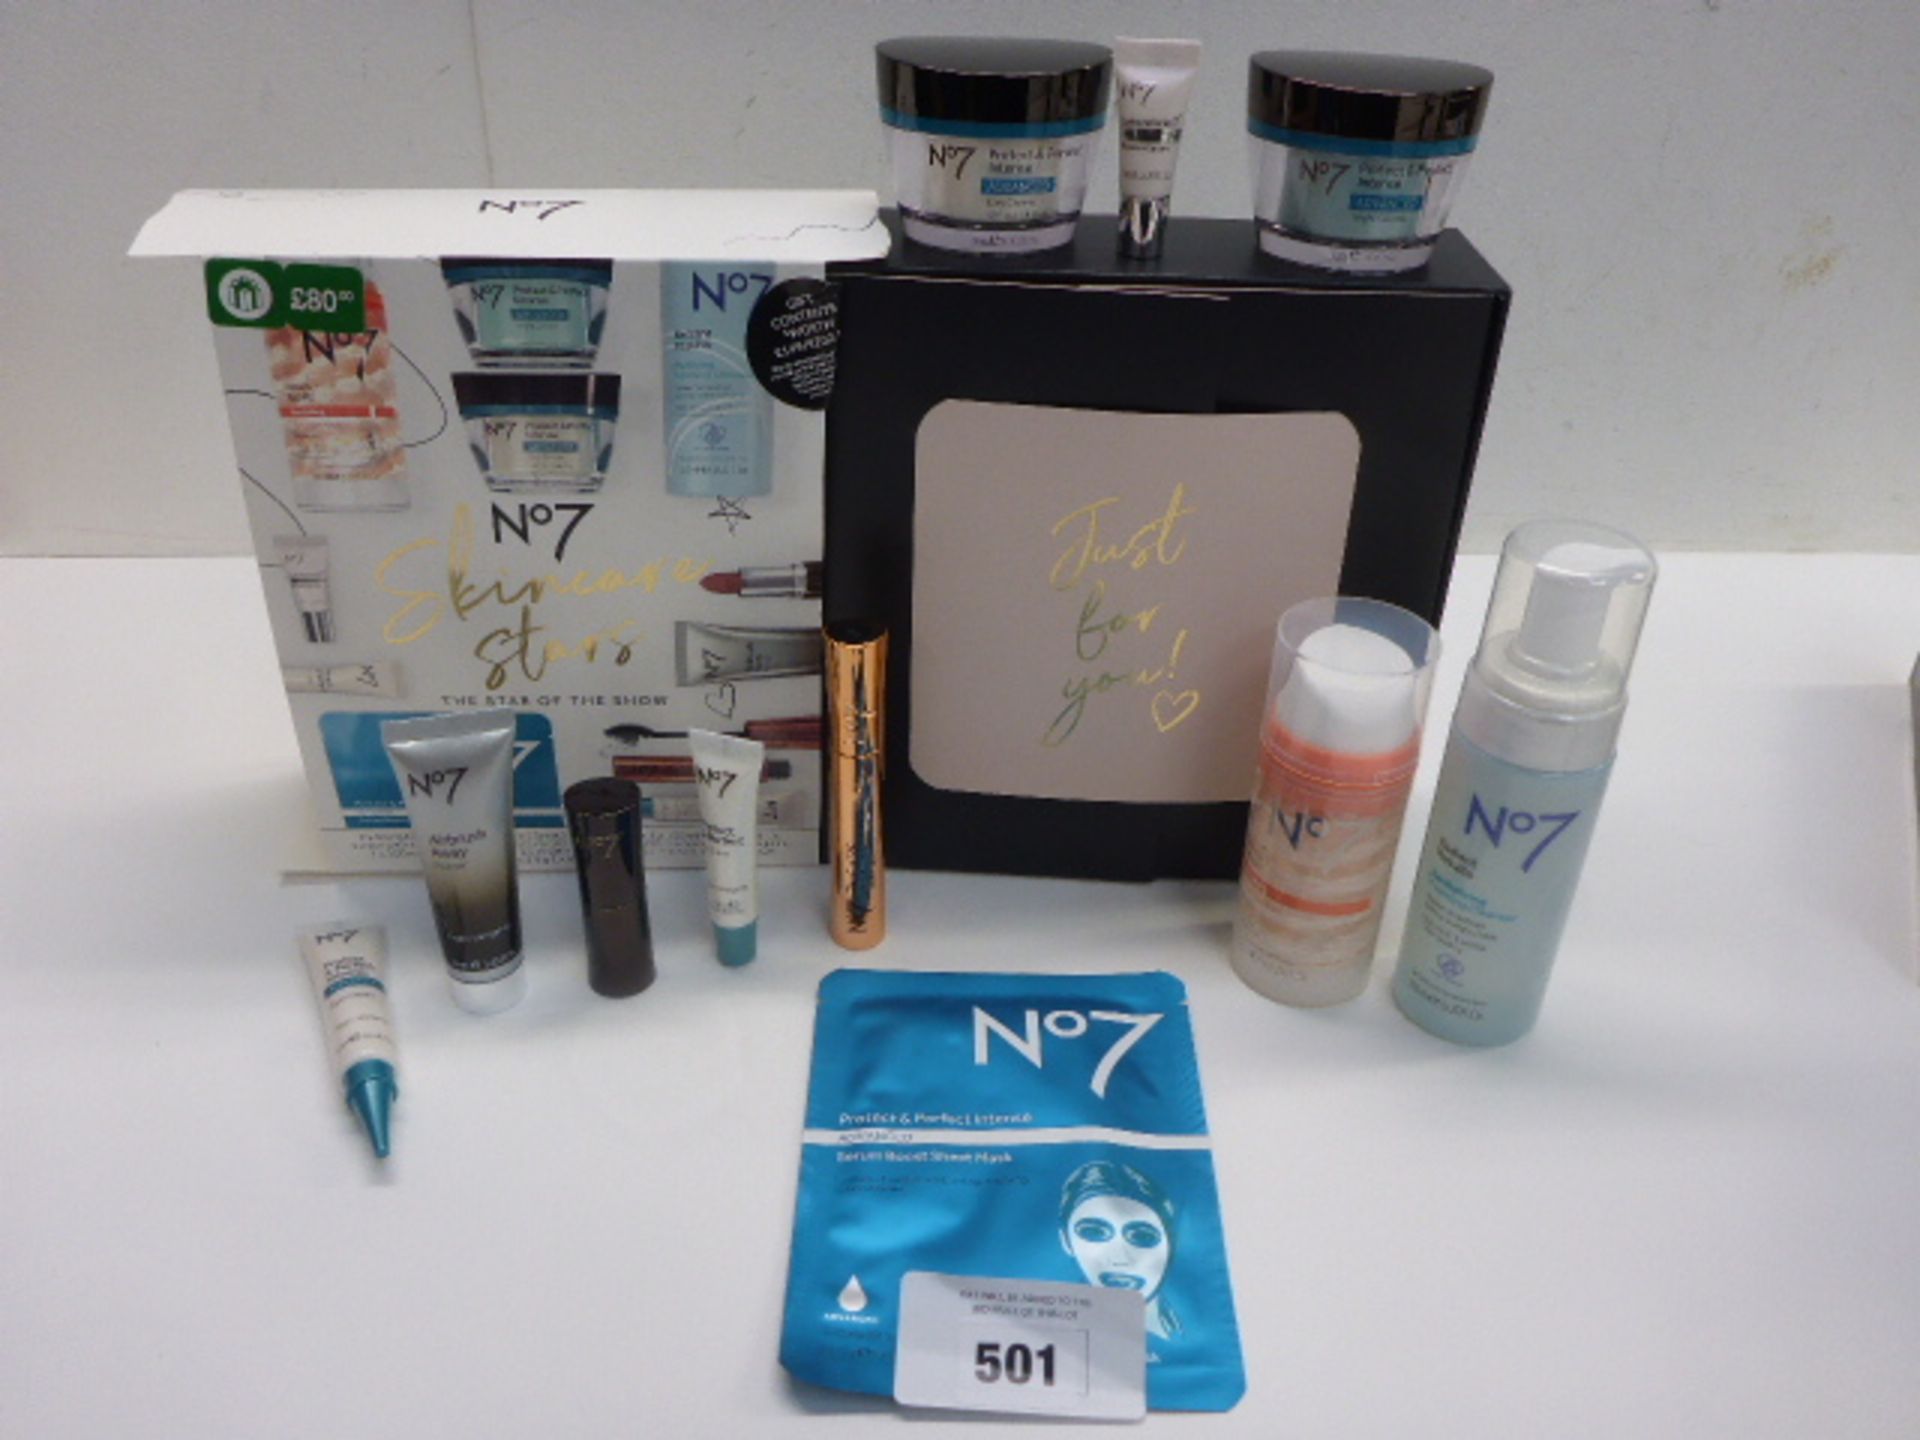 No. 7 Skincare Stars 'The Star of the Show' beauty gift box